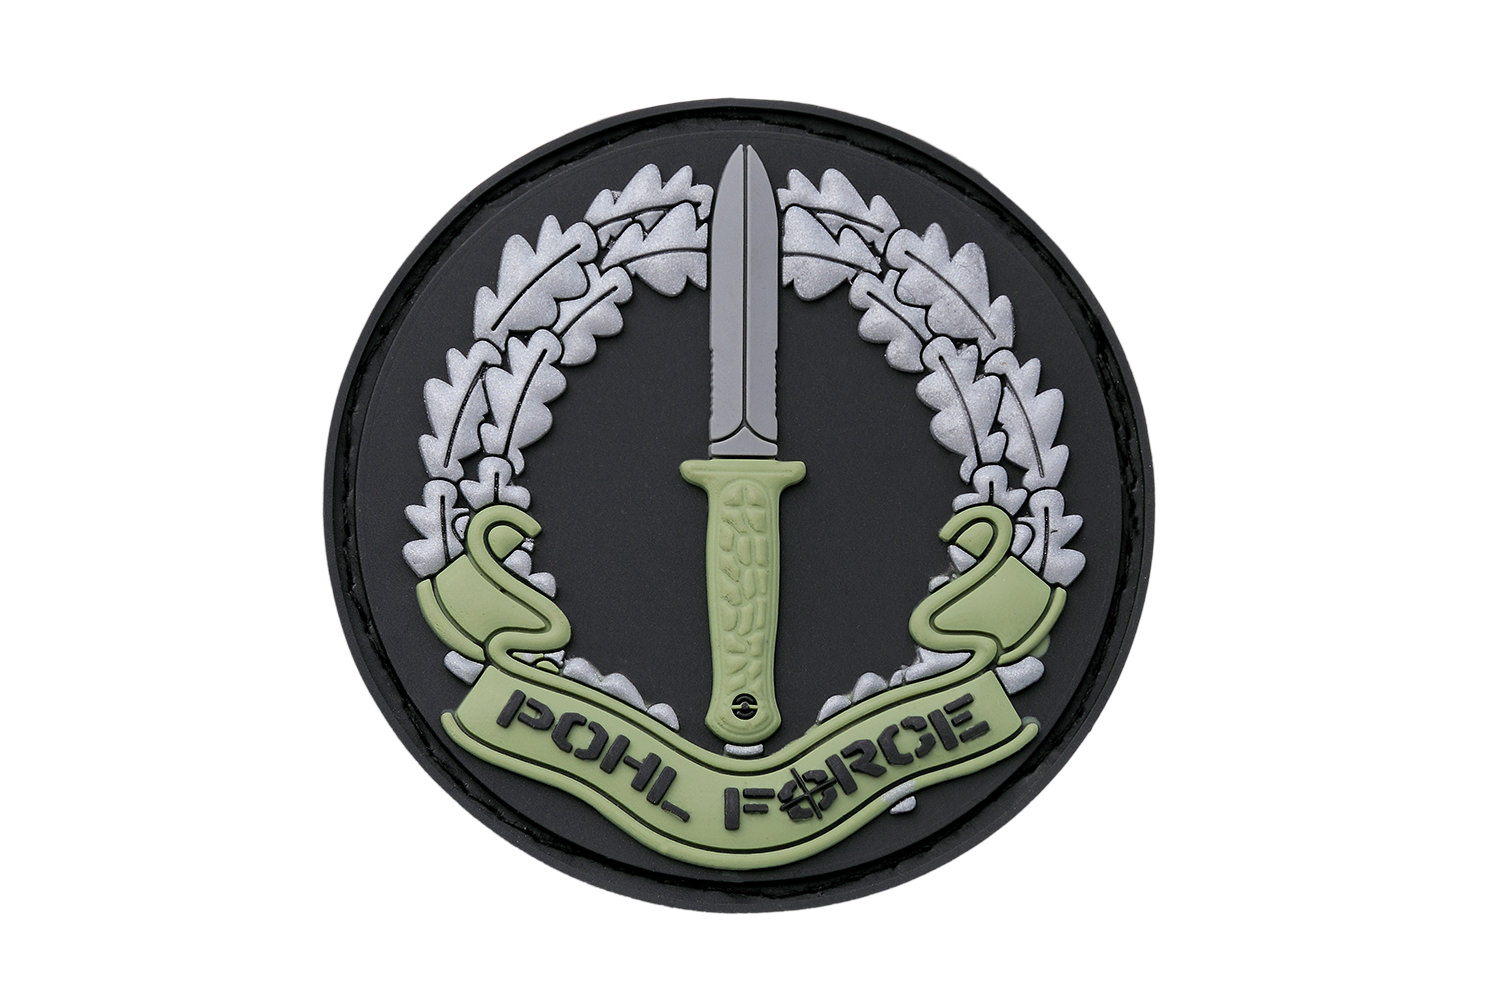 Pohl Force Rubber Patch Romeo